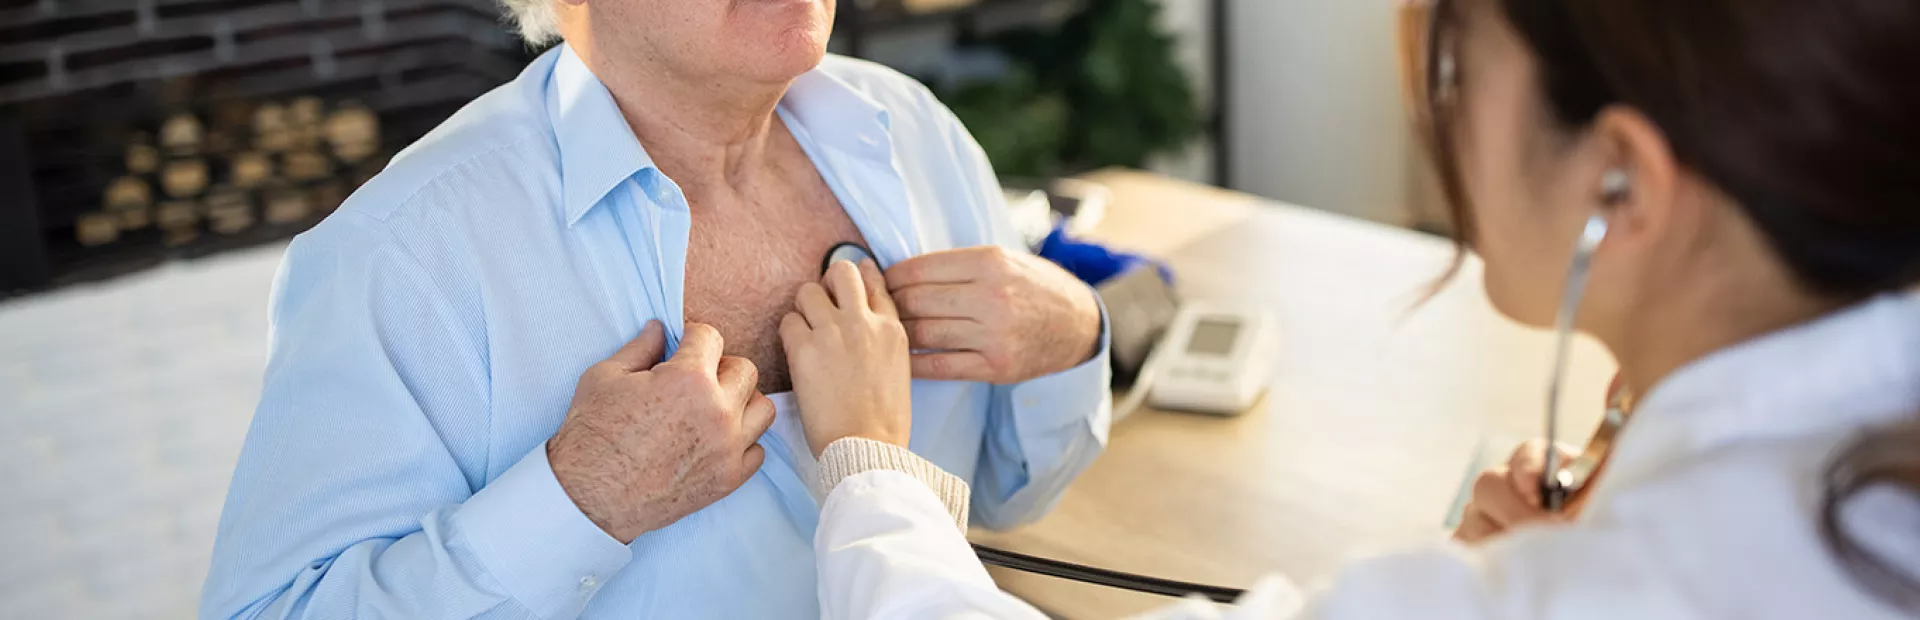 A person getting a heart check from a doctor